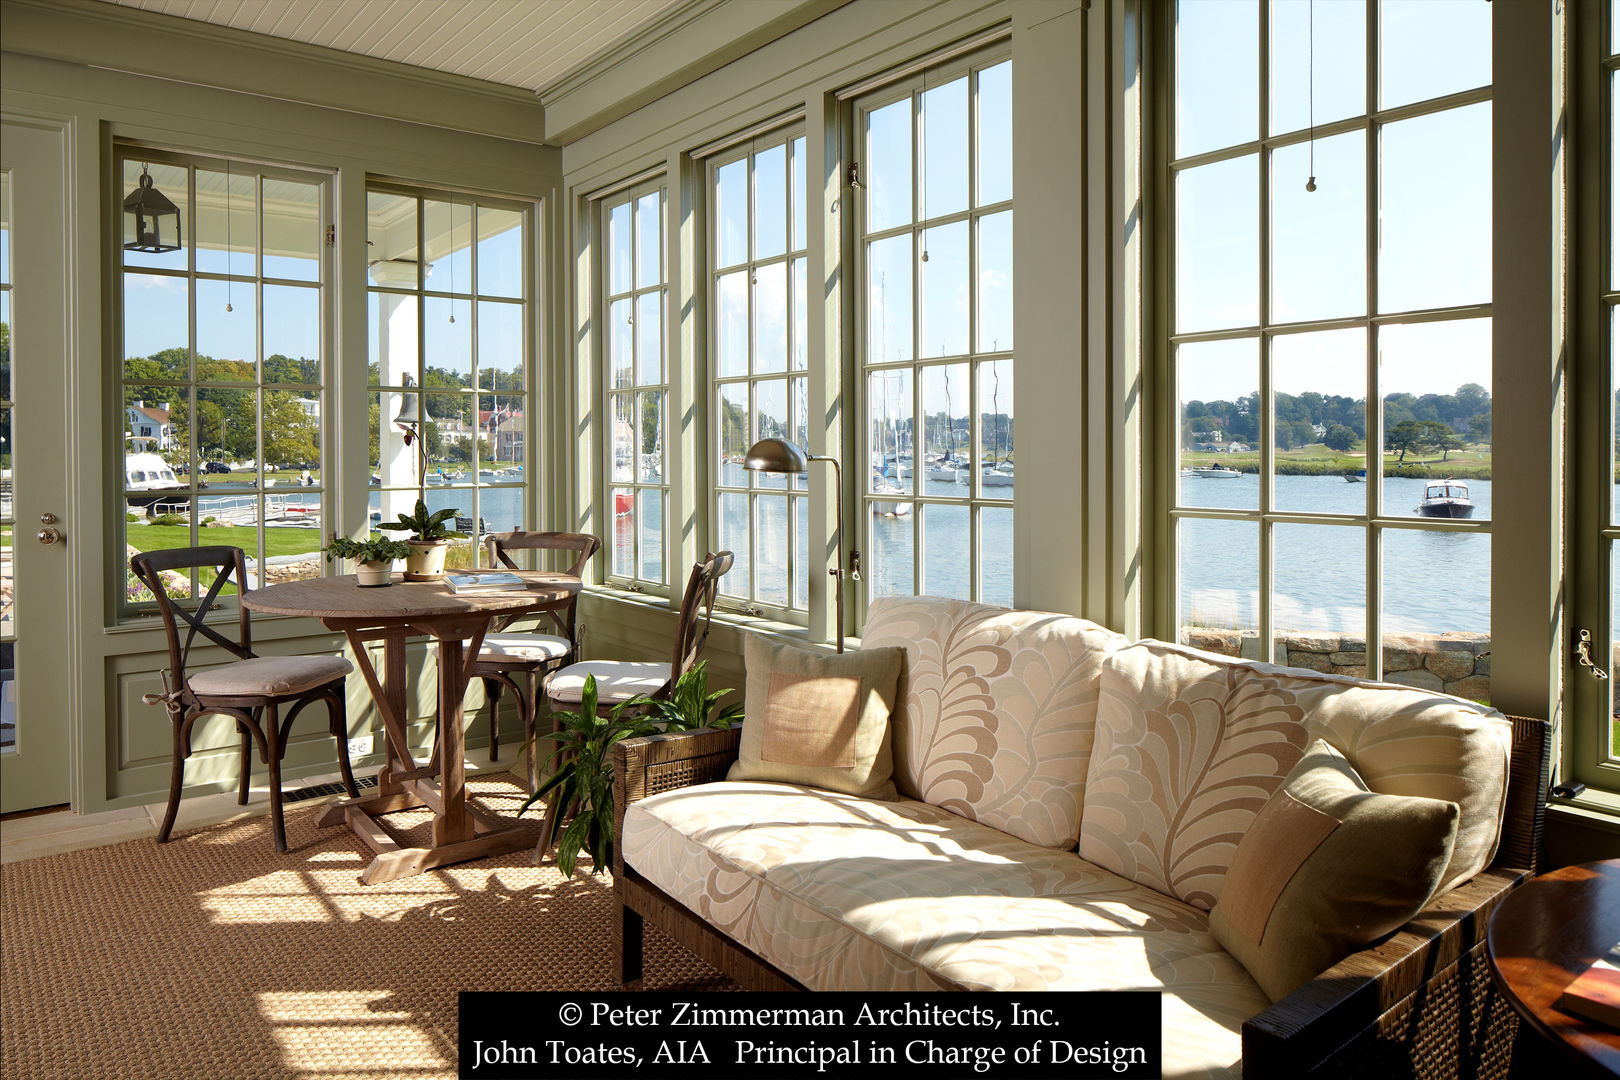 Enclosed Porch John Toates Architecture and Design Patios & Decks interior,porch,waterfront,classic,traditional